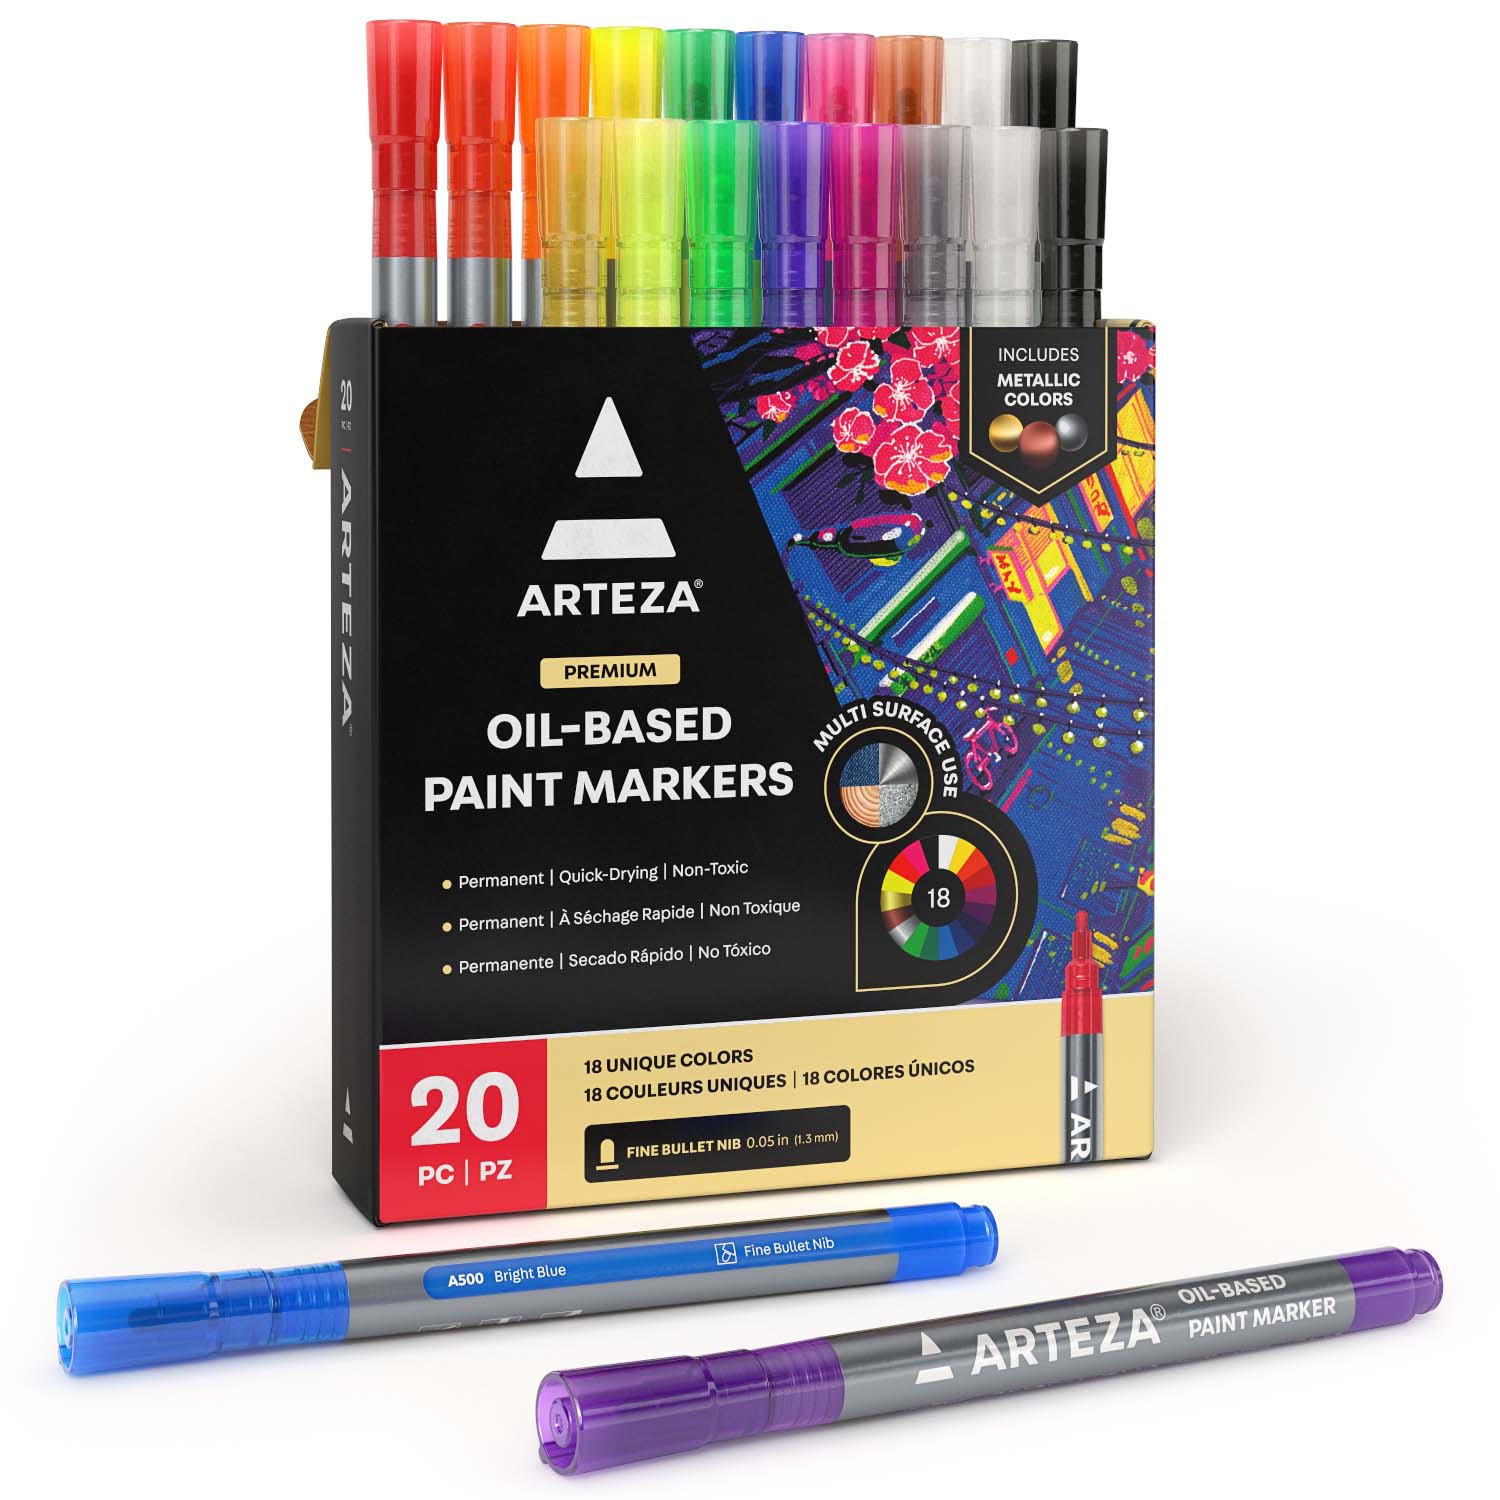  ARTEZA Pastel Oil-Based Markers, 8-Pack, 2.5 mm Line, Large  Barrel, Quick-Drying Permanent Marker Pens with Bullet Nib, Craft and Art  Supplies for Stone, Wood, Glass, and Metal Painting : Arts